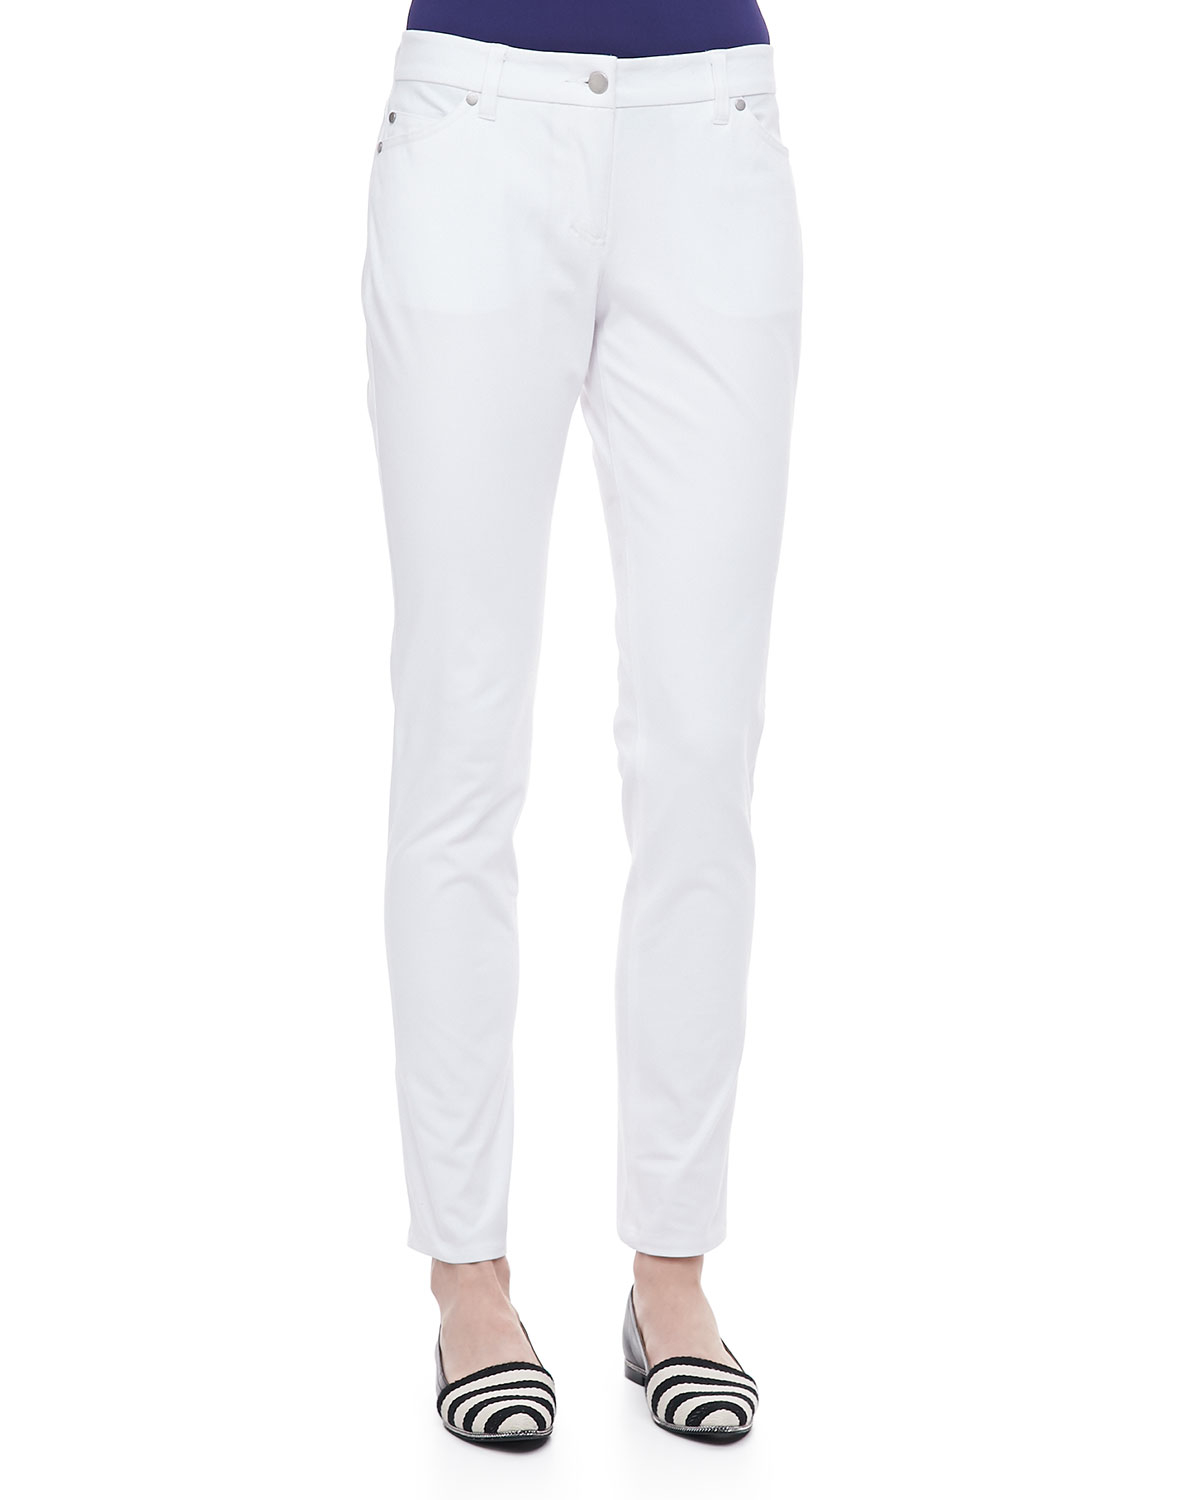 Lyst - Eileen Fisher Organic Cotton Skinny Jeans White in White